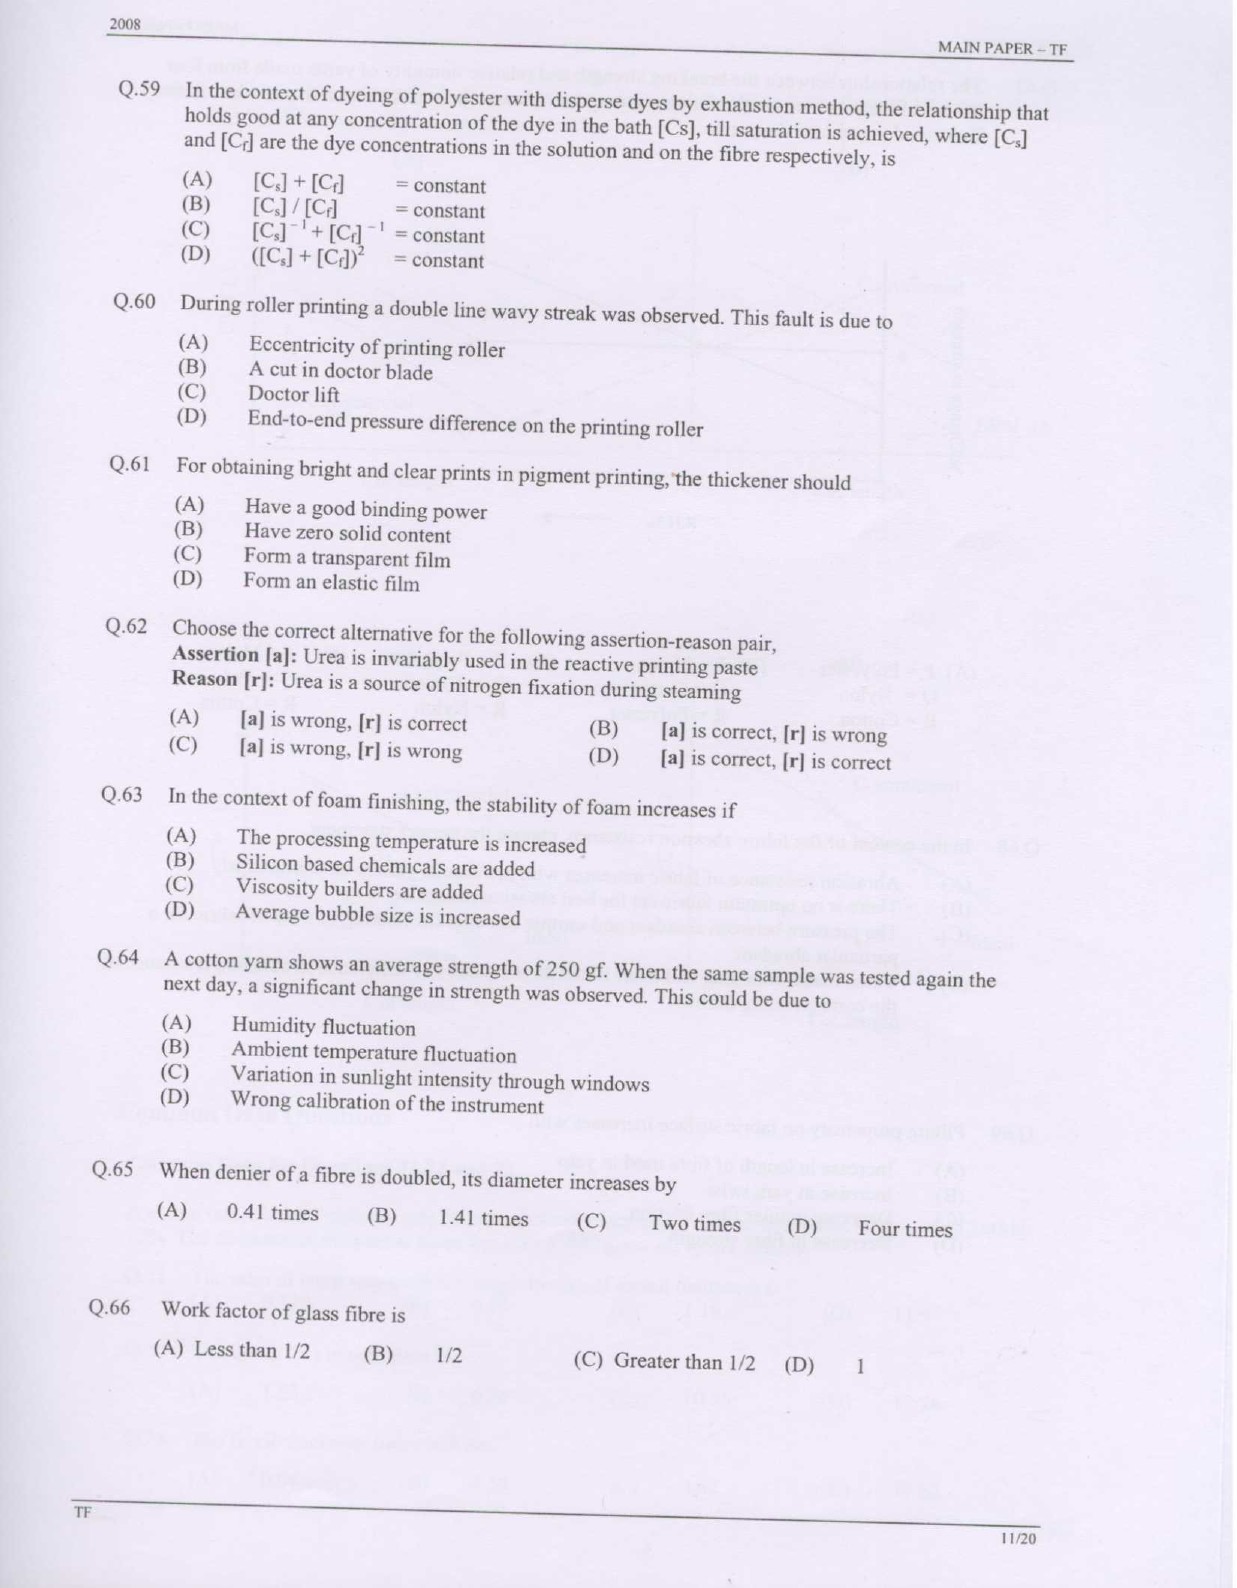 GATE Exam Question Paper 2008 Textile Engineering and Fibre Science 11